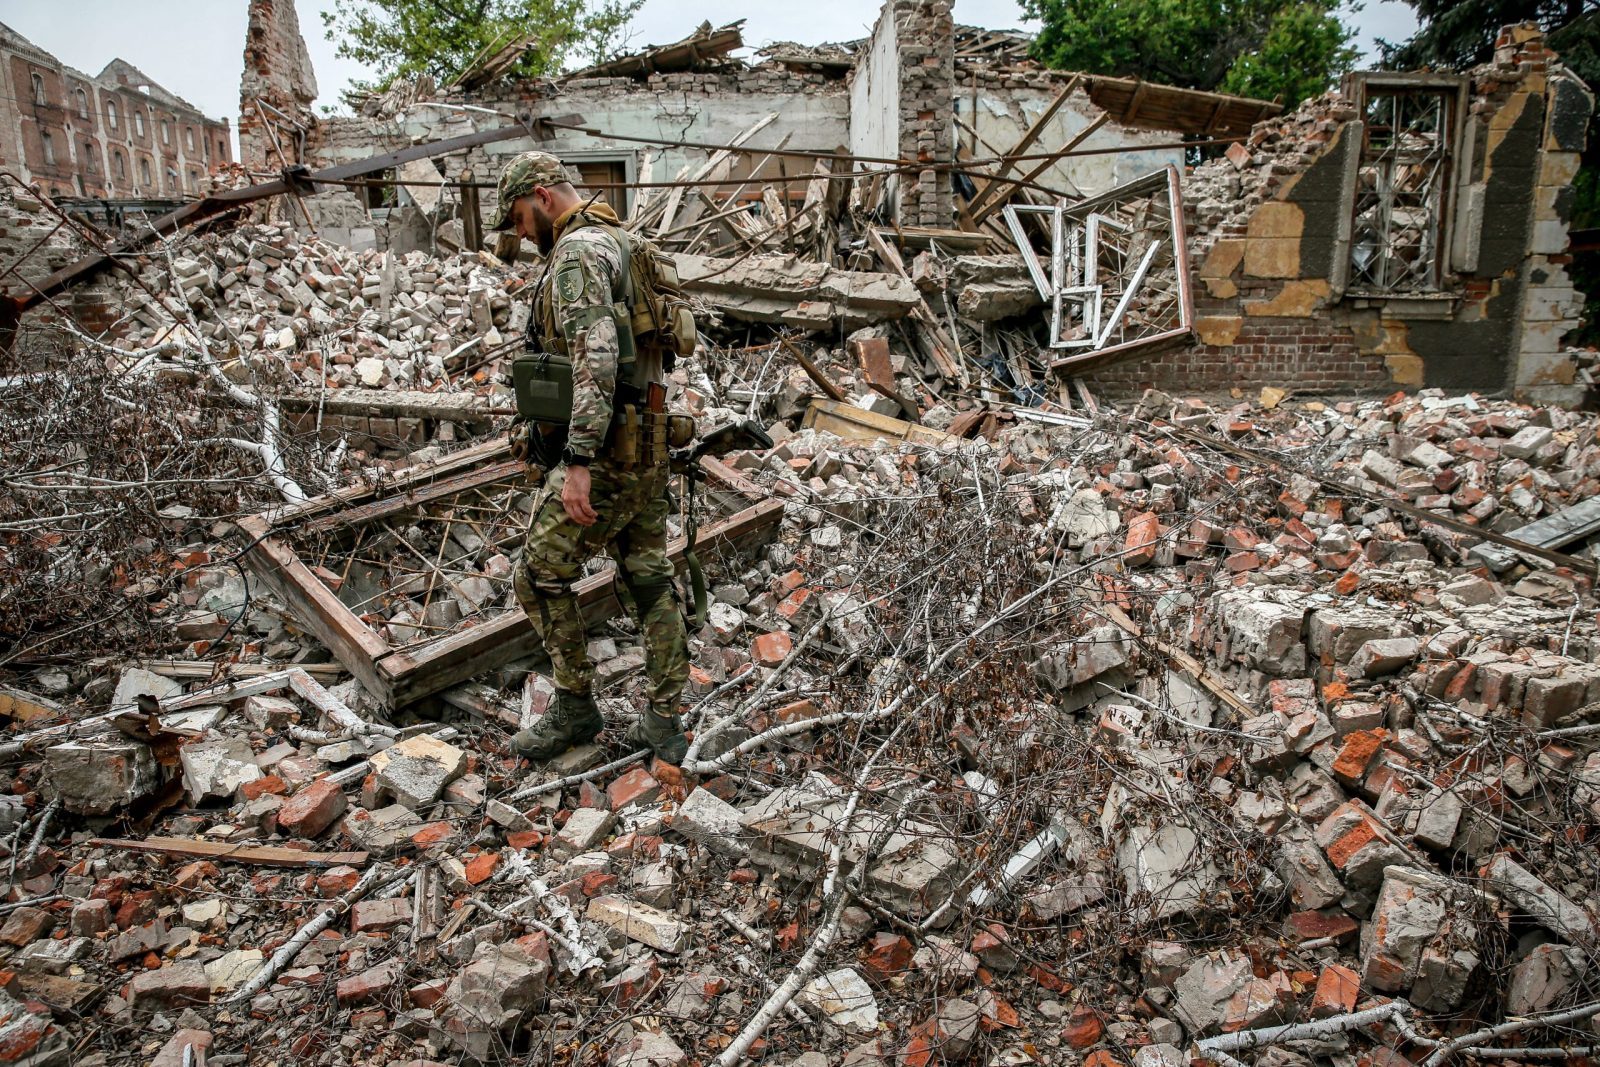 epa10758513 A Ukrainian serviceman of the 24 separate mechanized brigade named after King Danylo, walks amid the ruins of a building destroyed by Russian missile strikes in the Donetsk region, Ukraine, 20 July 2023. The war in Ukraine, which started when Russia entered the country in February 2022, marked in July its 500th day. According to the UN, since the conflict started, more than 9000 civilians have been killed and more than 6 million others are now refugees worldwide.  EPA/OLEG PETRASYUK